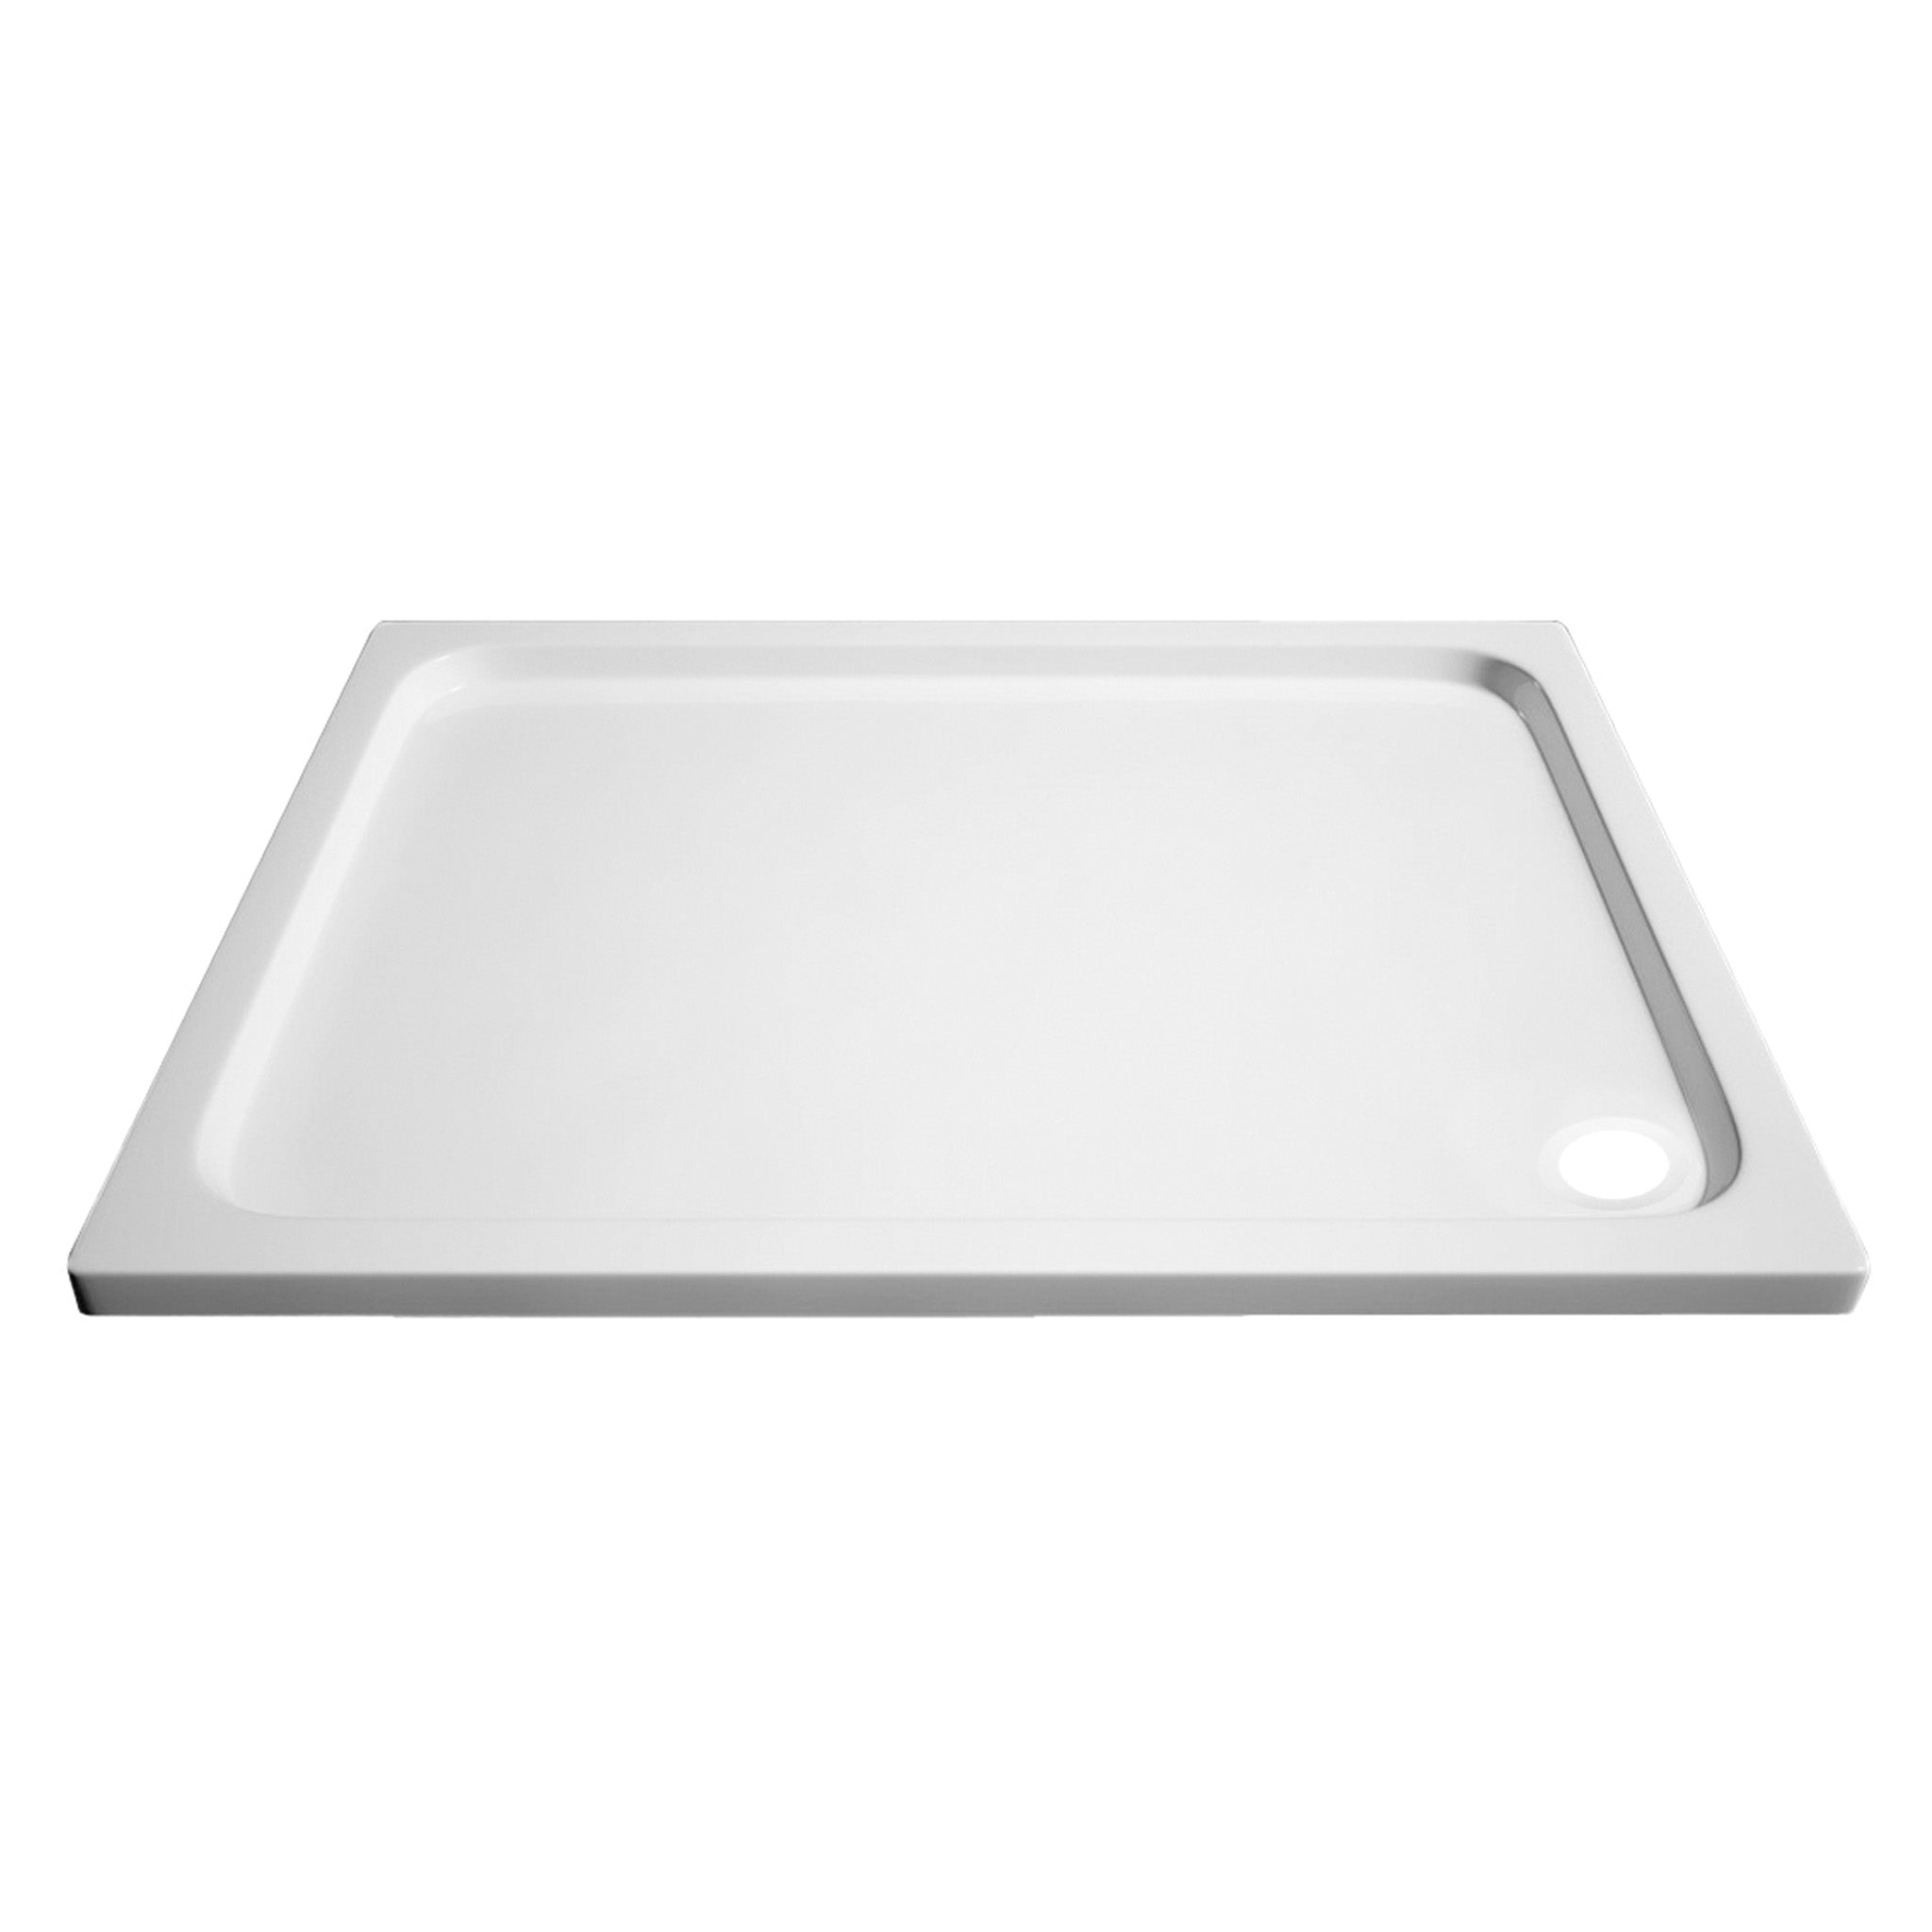 MyStyle Slimline ABS Rectangle Shower Tray